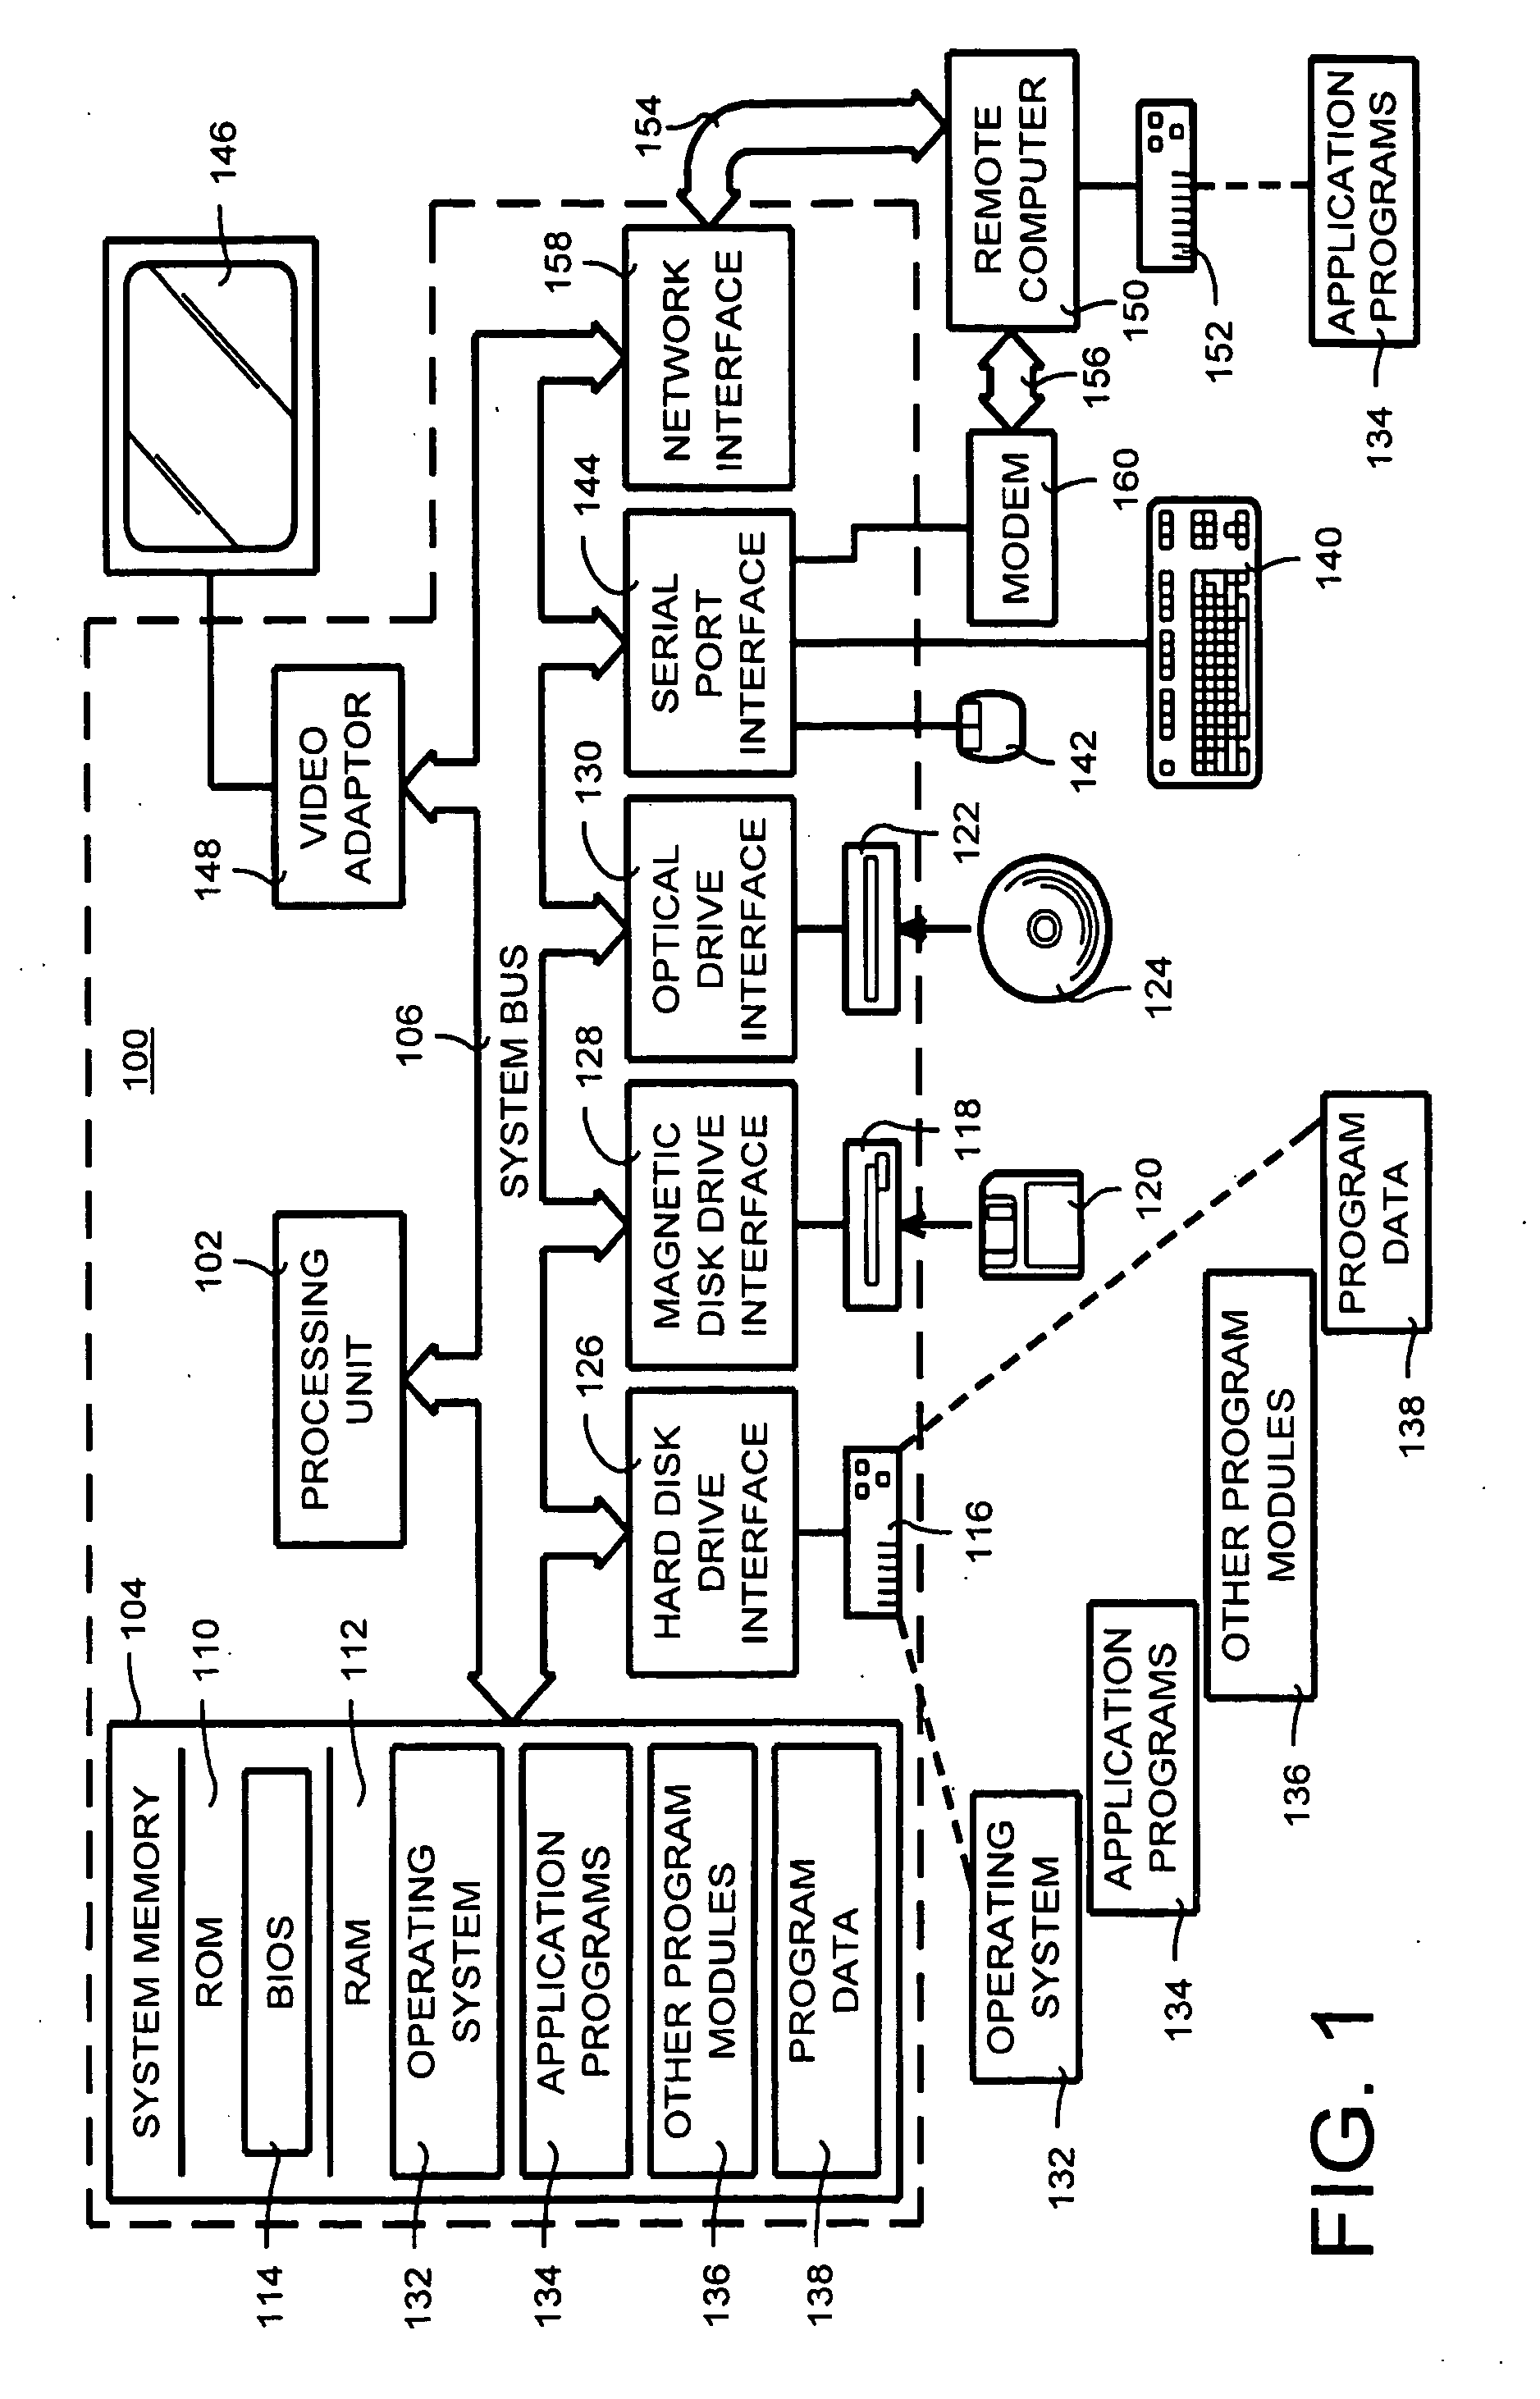 System and method for facilitating user input by providing dynamically generated completion information